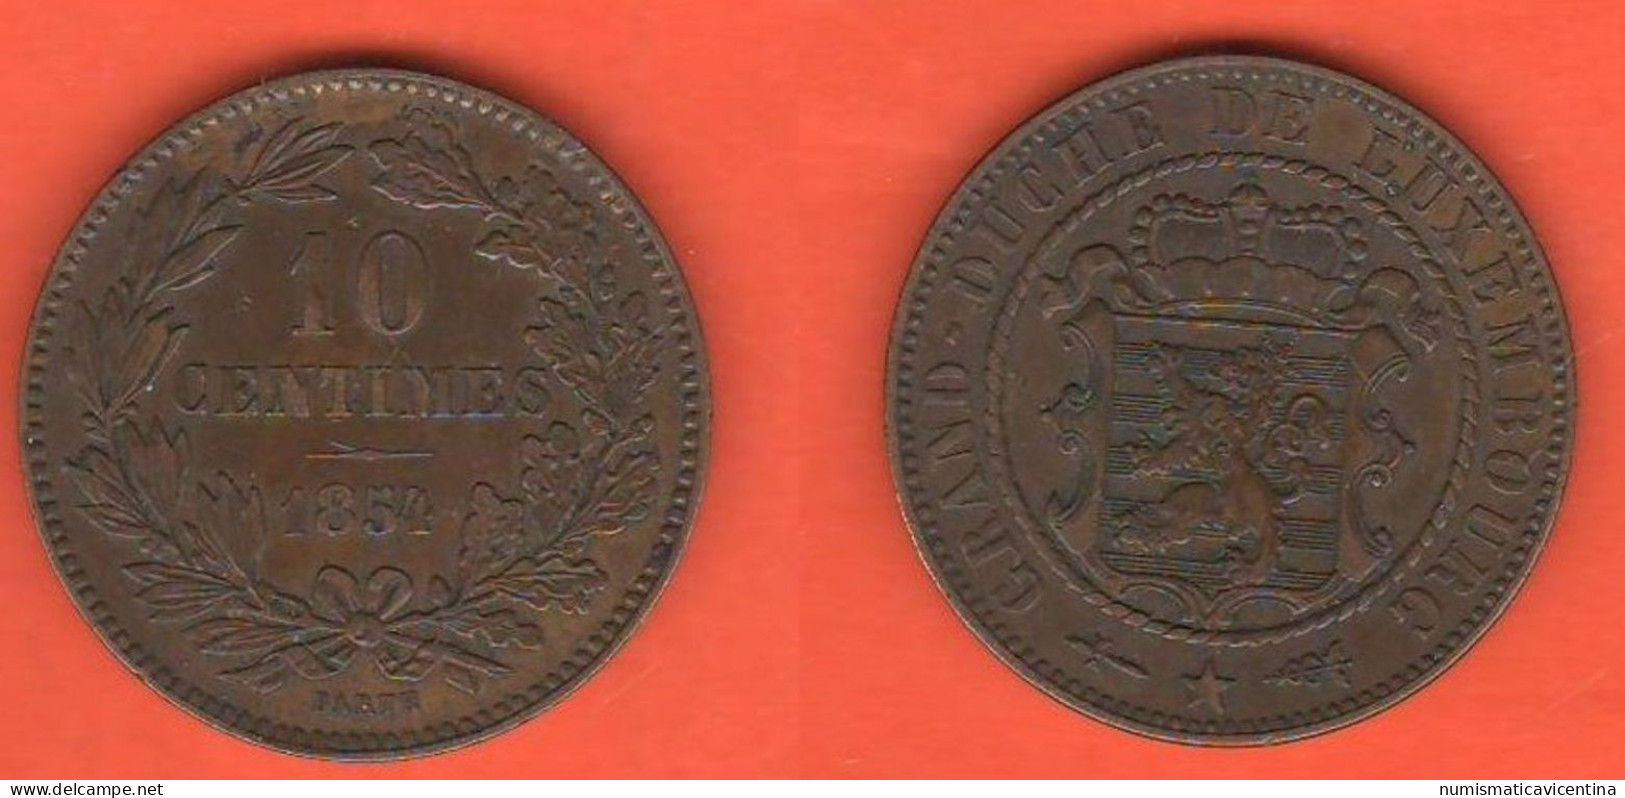 Luxembourg 10 Centimes 1854 Lussemburgo Bronze Coin  K 23 - Luxembourg